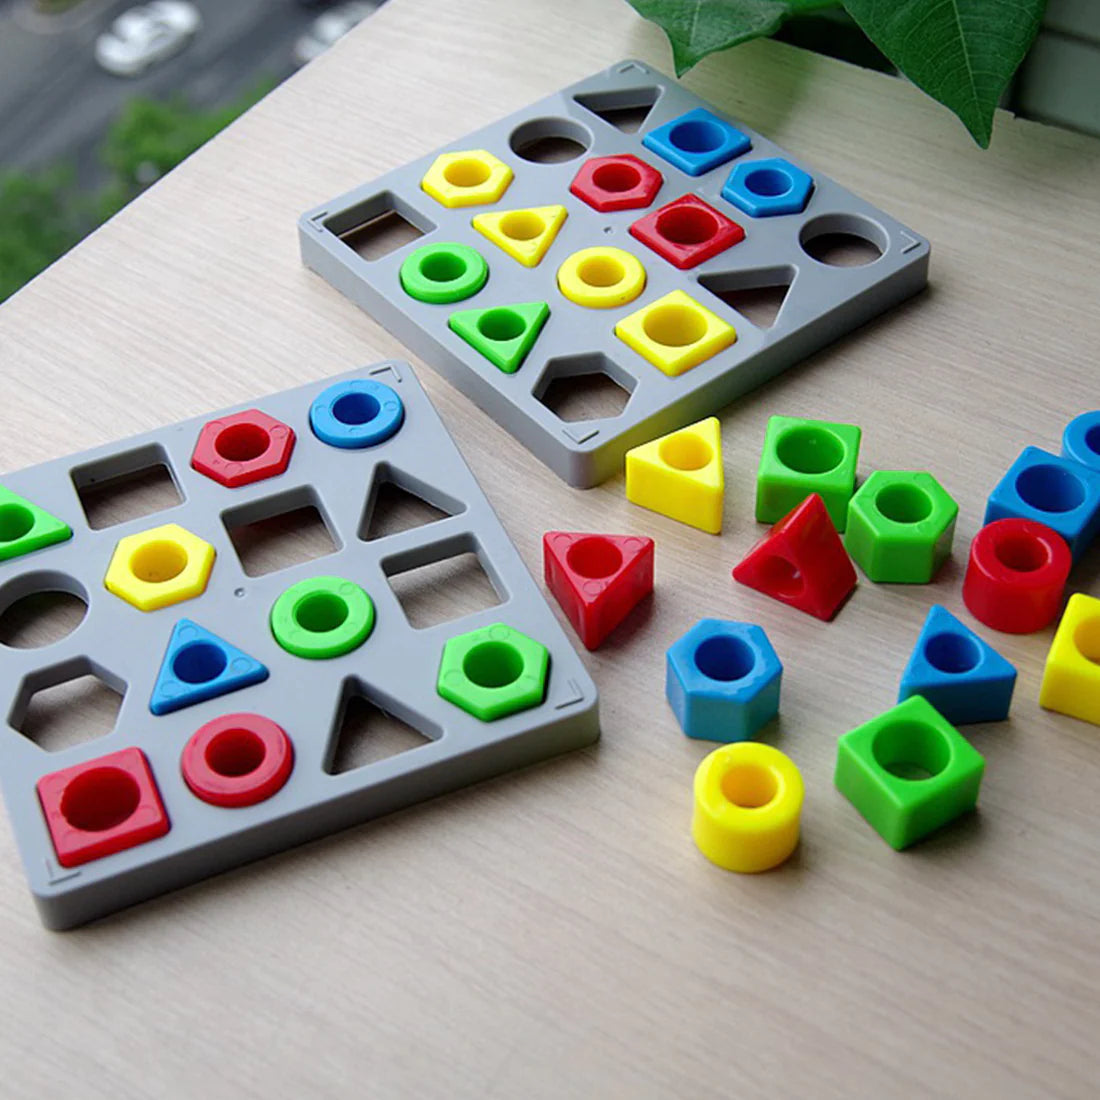 Shape Matching Puzzle Game